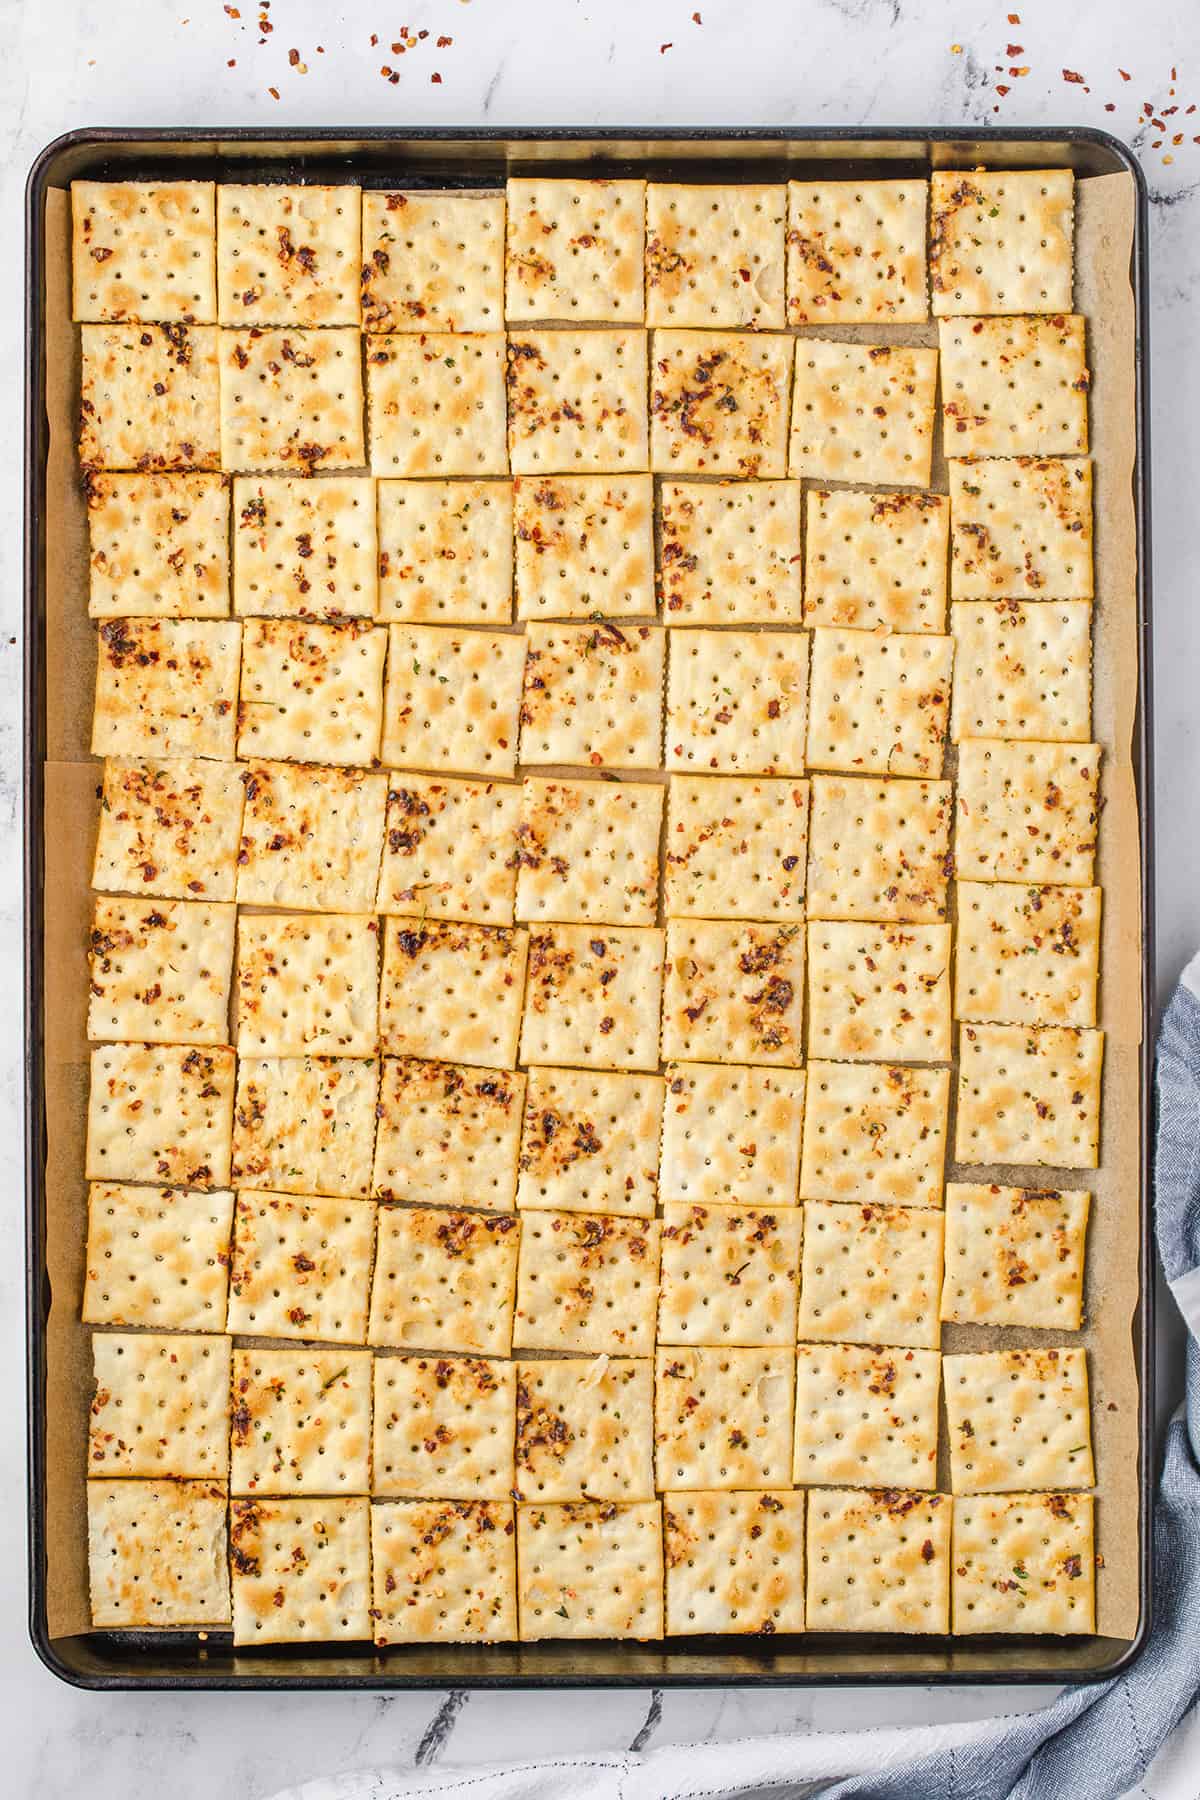 Crackers laid out on a baking sheet.